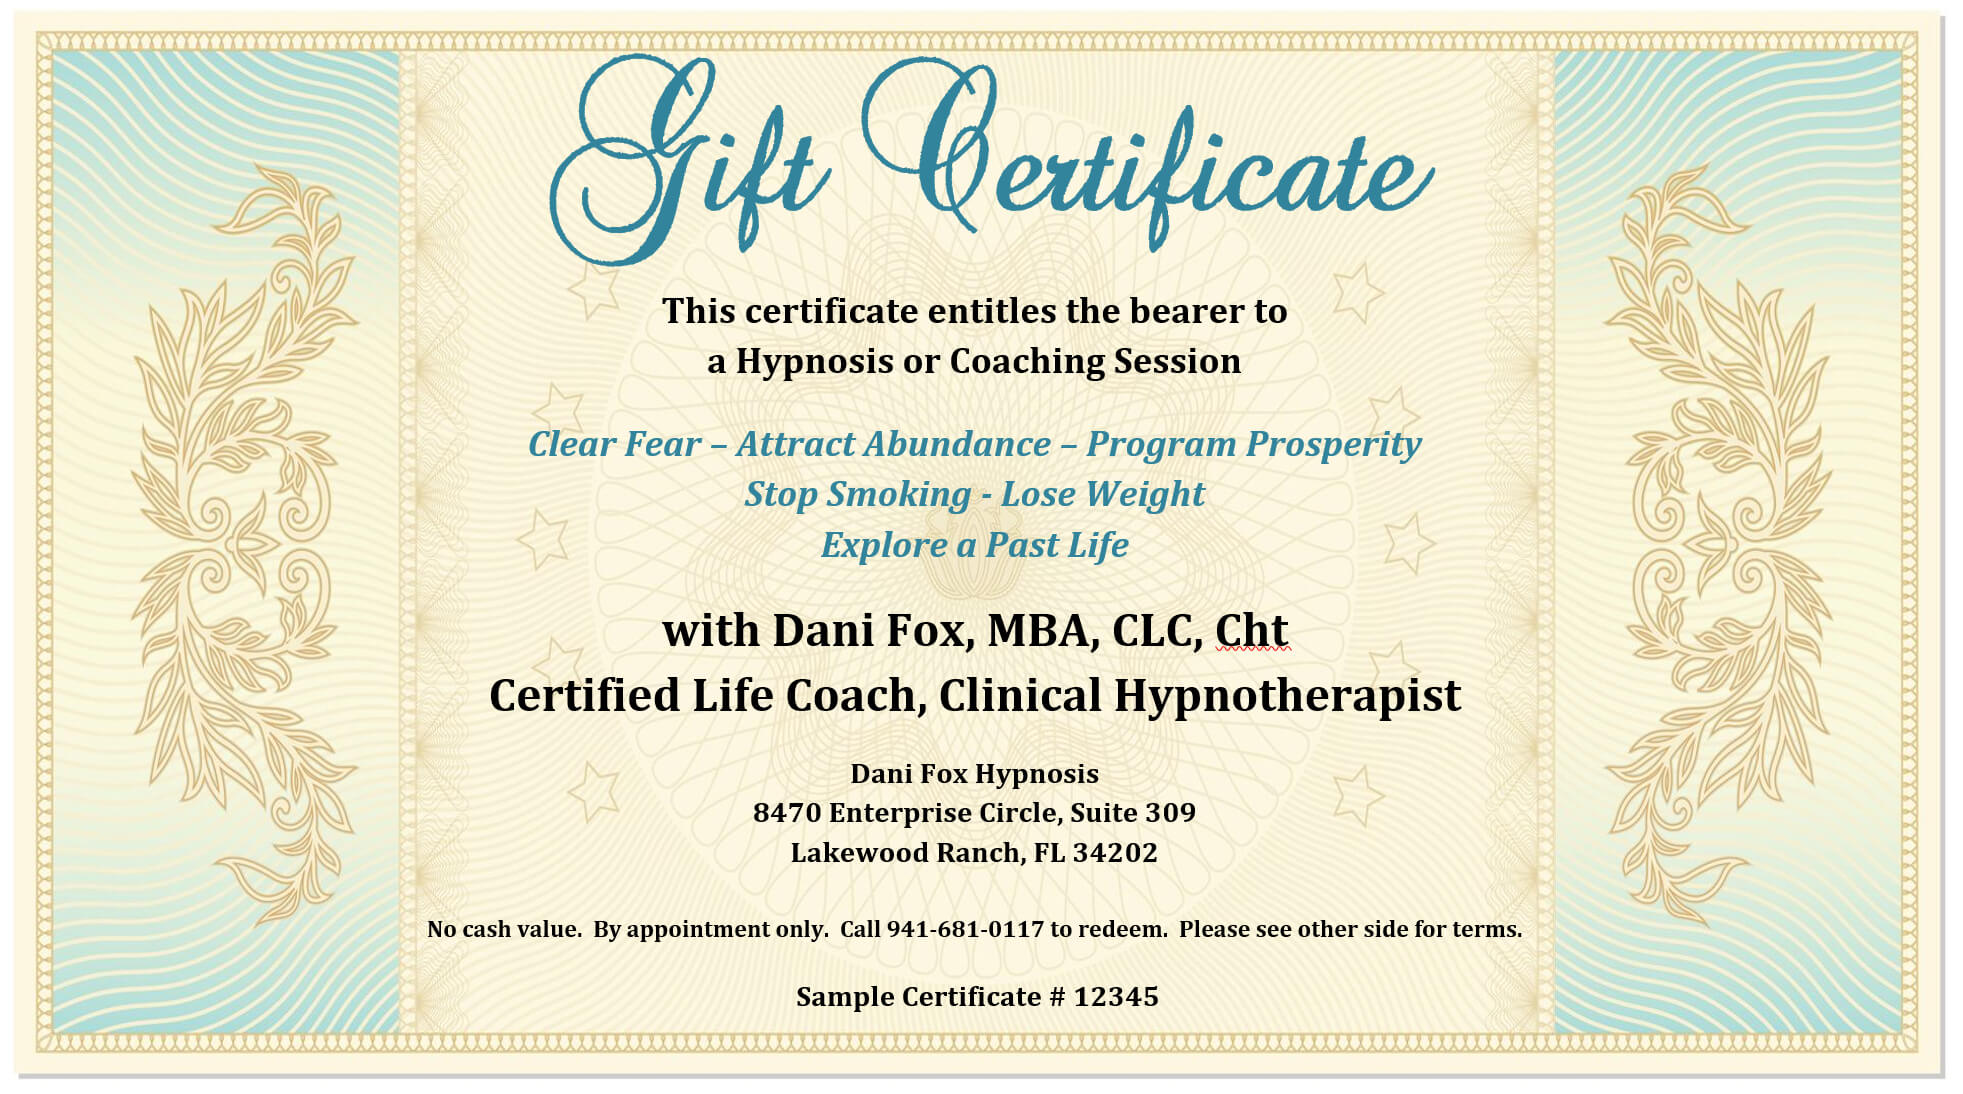 Gift Certificate – Dani Fox Hypnosis With Regard To Sample Pertaining To This Certificate Entitles The Bearer To Template